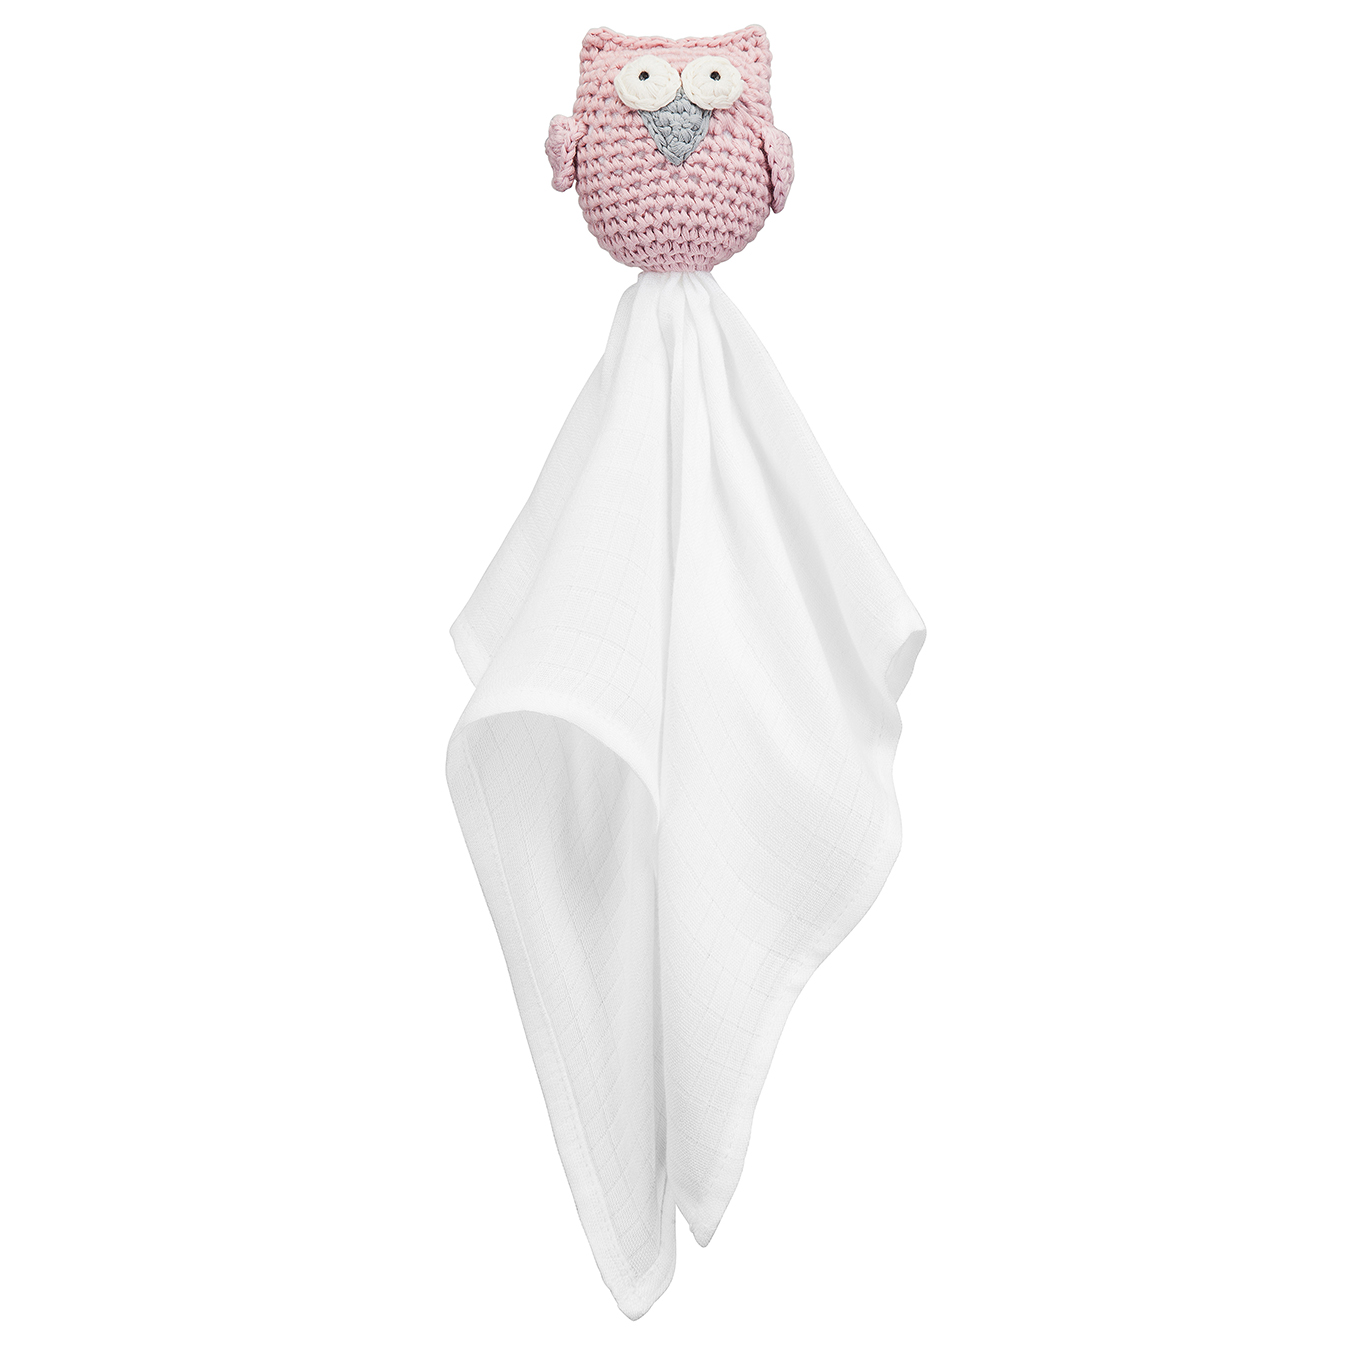 Snuggle toy Owl -  dusty pink